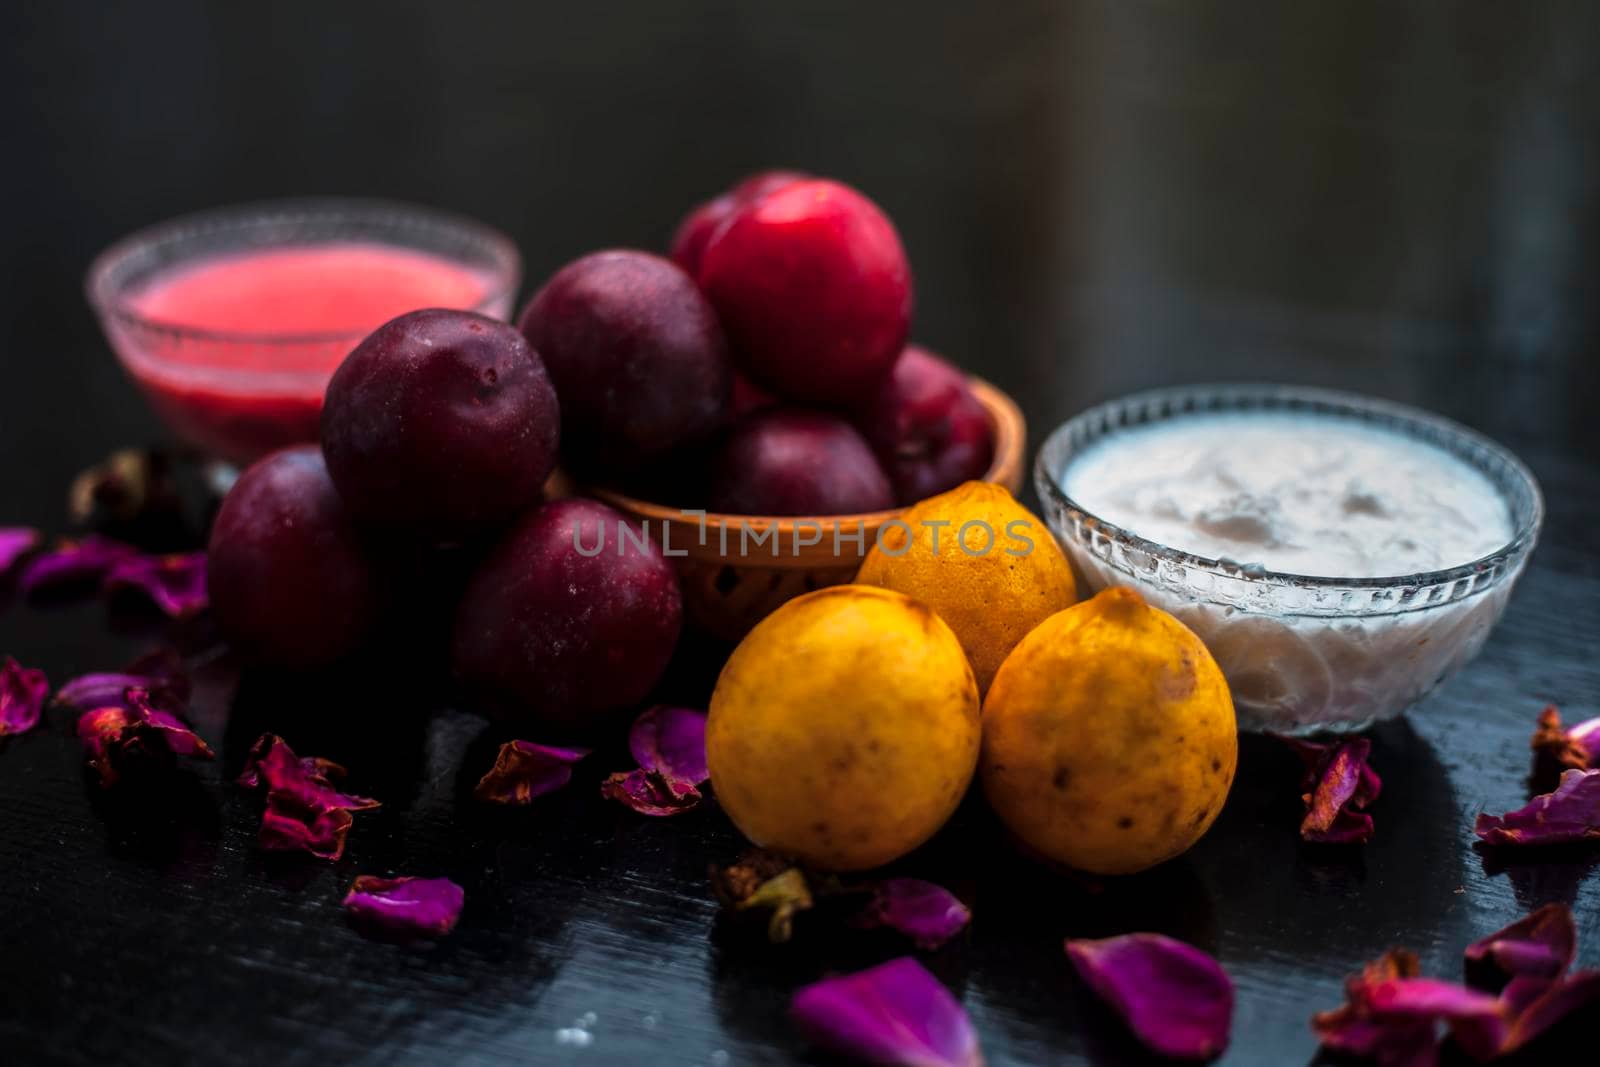 Healthy face mask of plum or aloo Bukhara in a glass bowl on the wooden surface consisting of plum extract, water, curd, and some lemons also for protection against harmful UV rays and sun damage. by mirzamlk